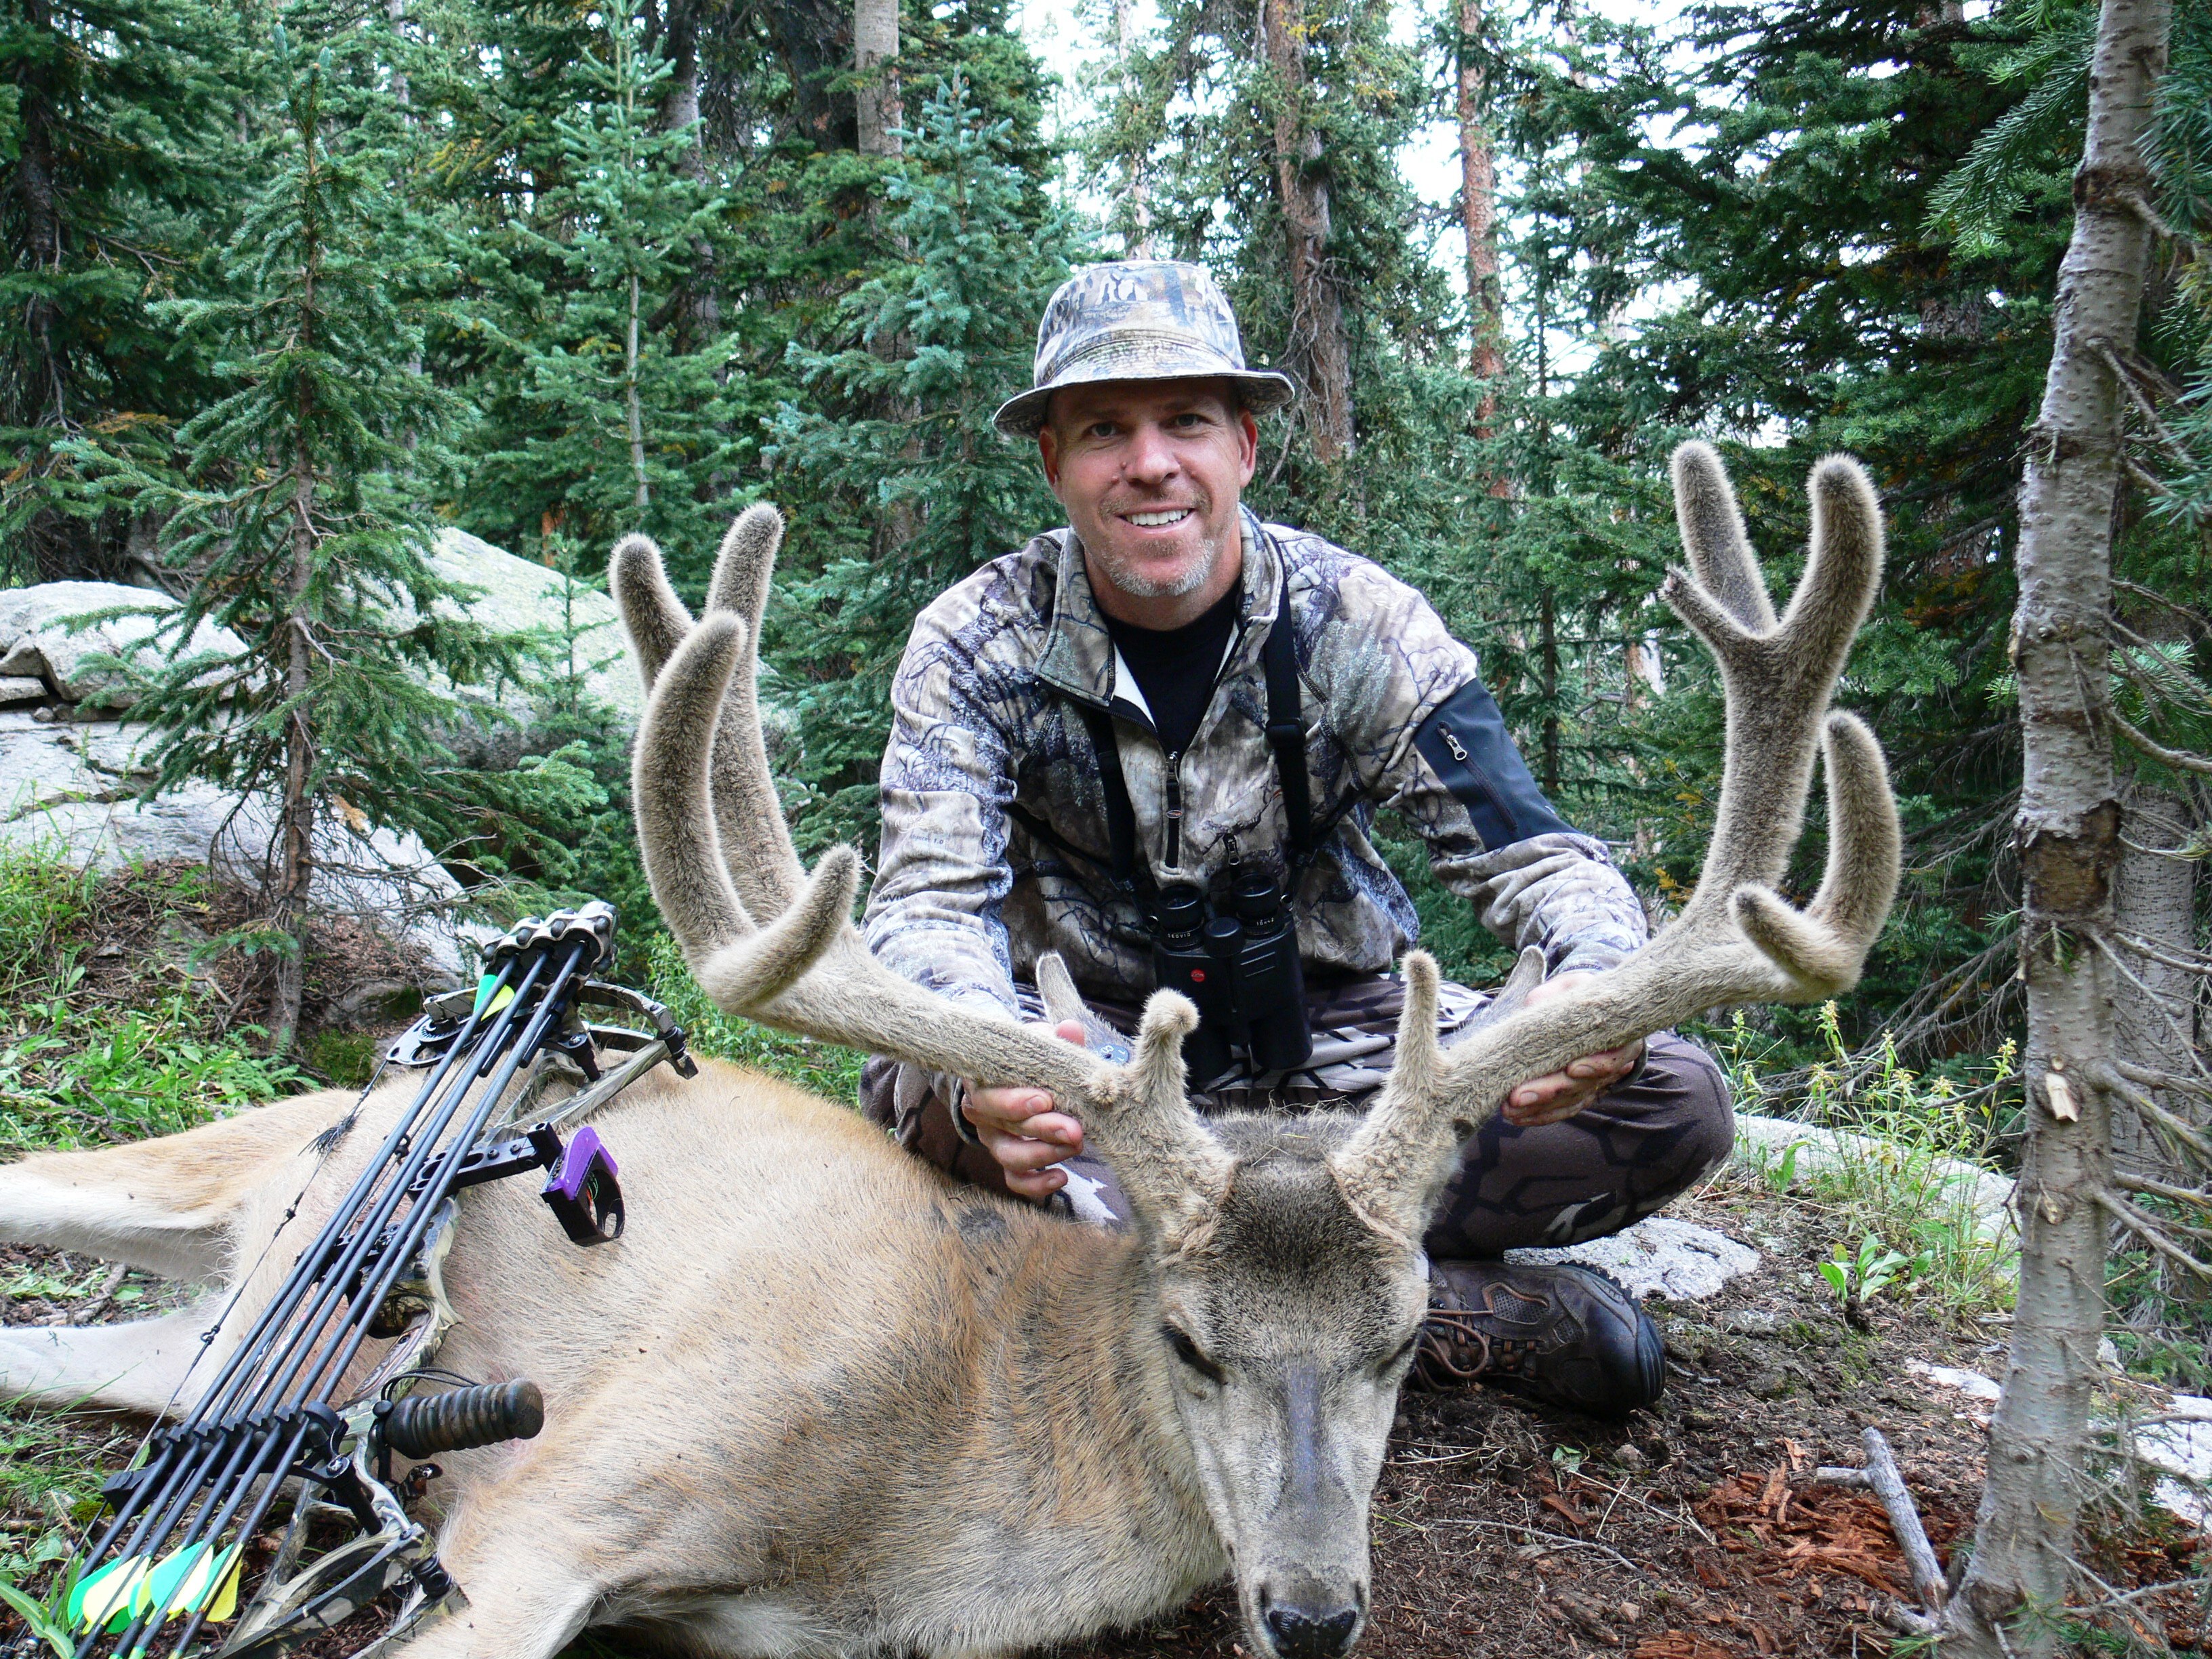 Roy Crace with a nice mule deer buck in velvet while bowhunting.